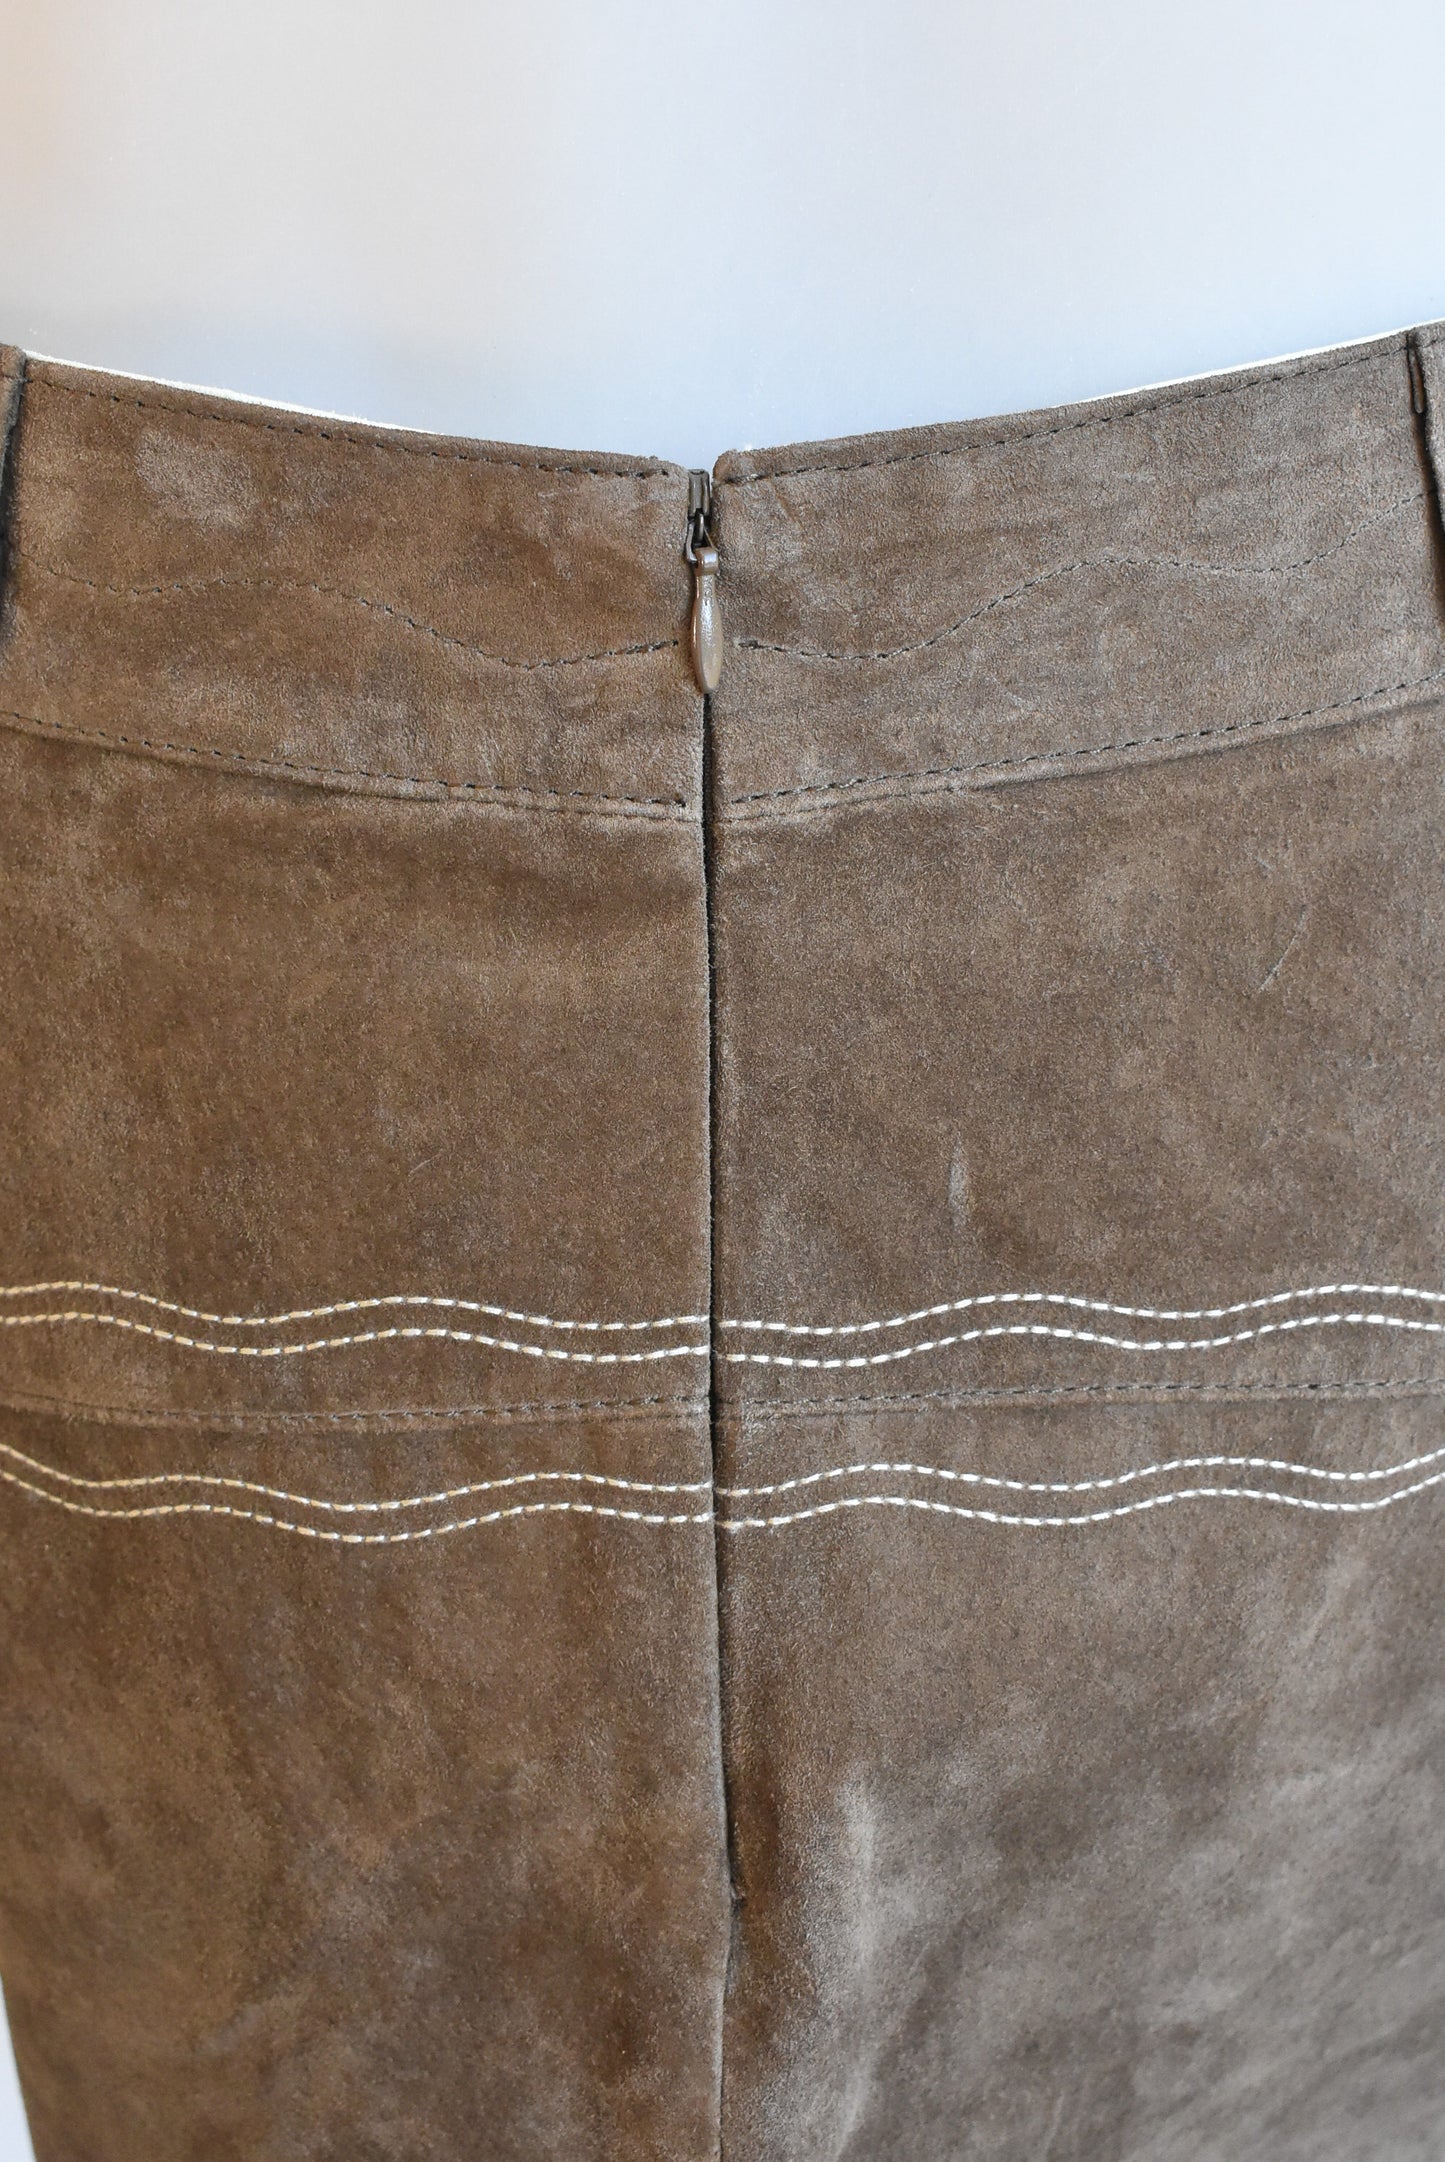 Women genuine leather suede brown skirt, size 8-10